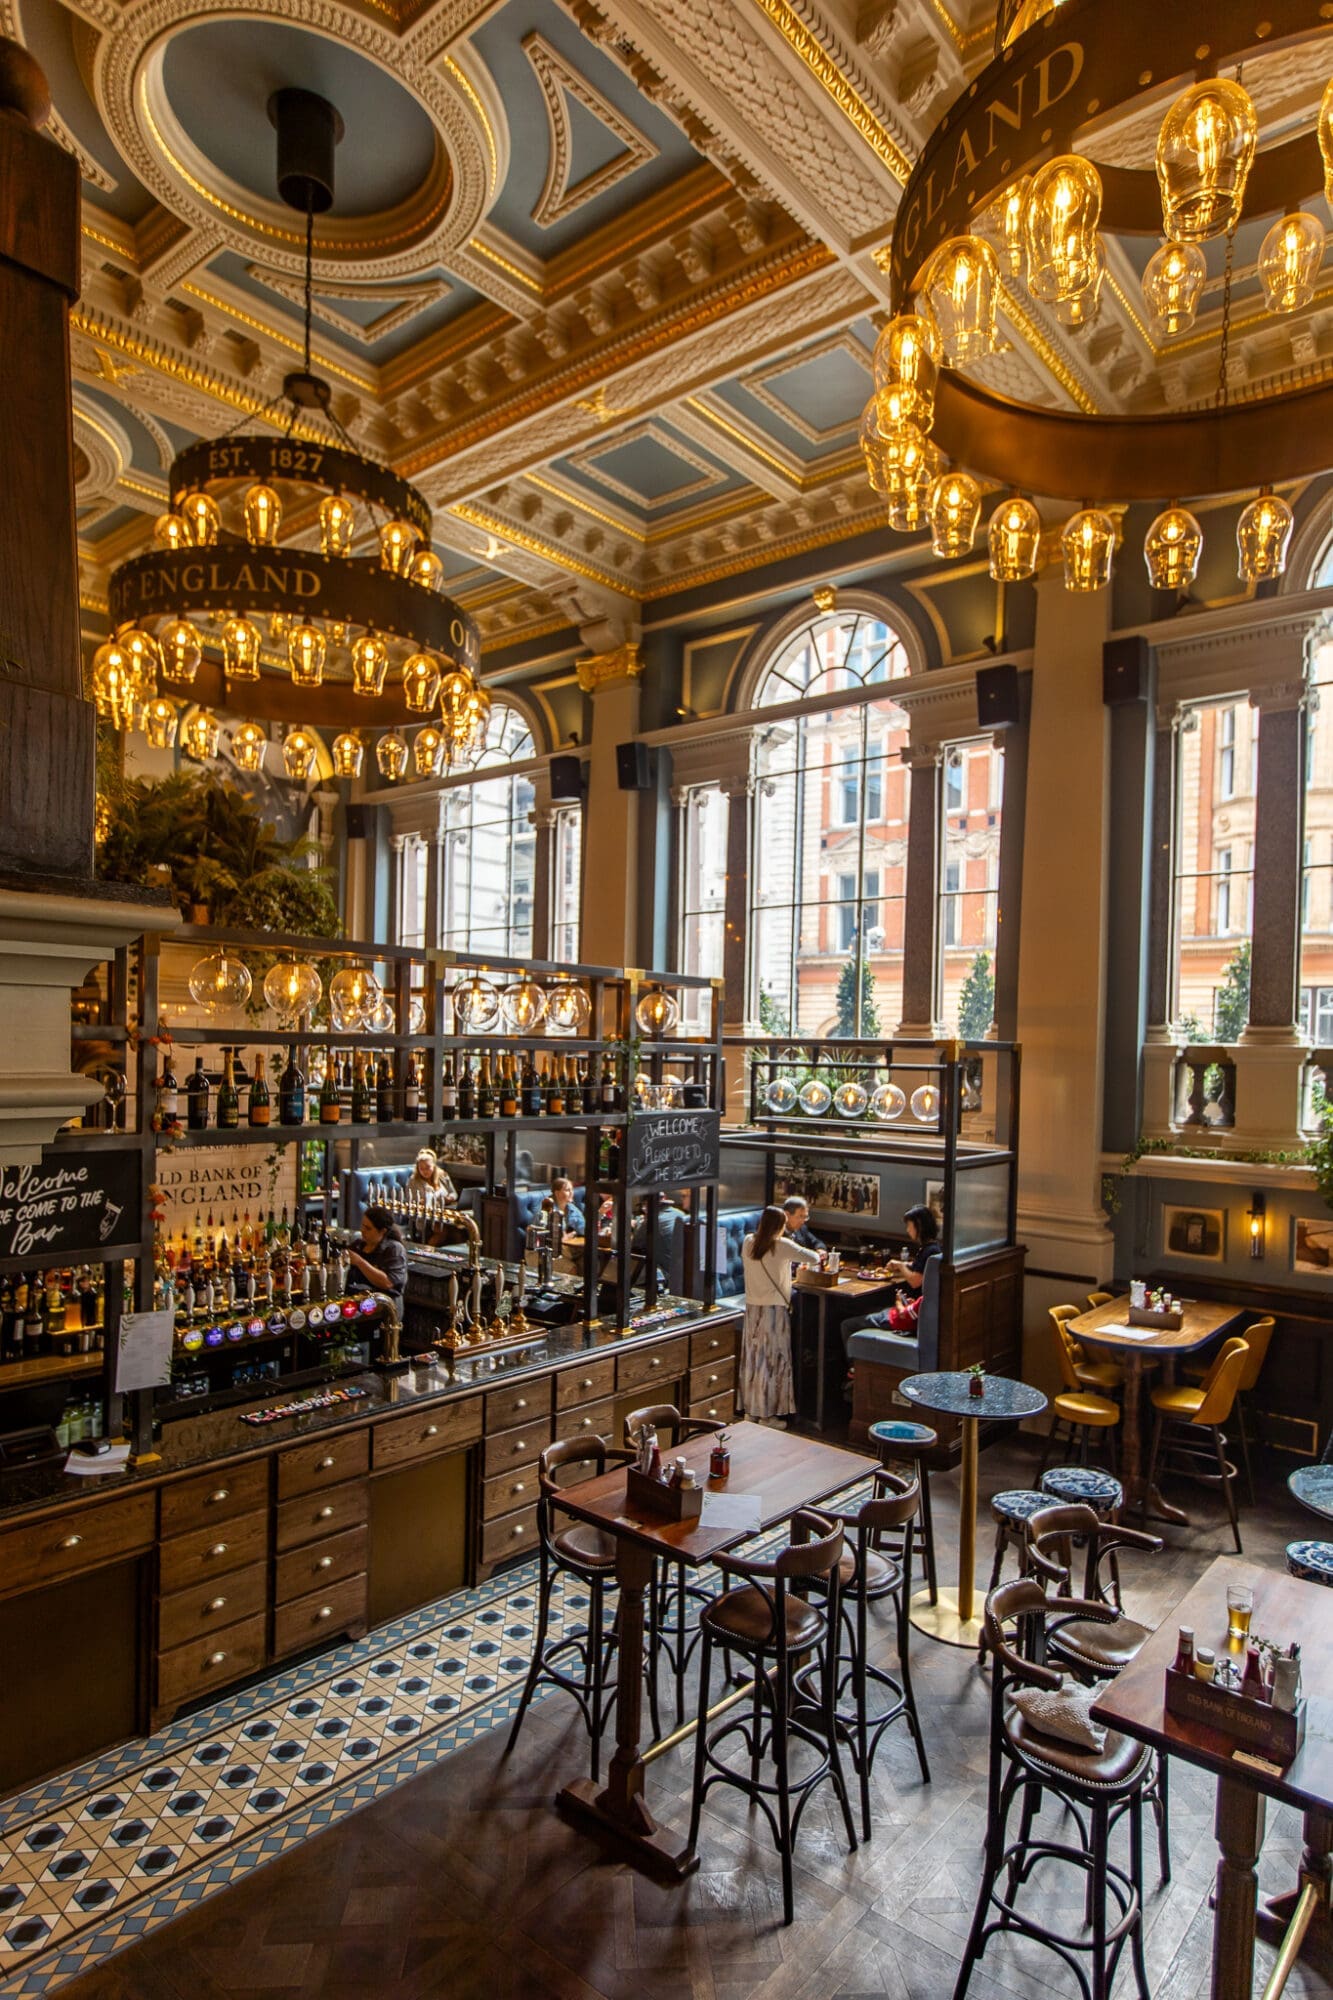 the decorative interior of the bank of england pub in London